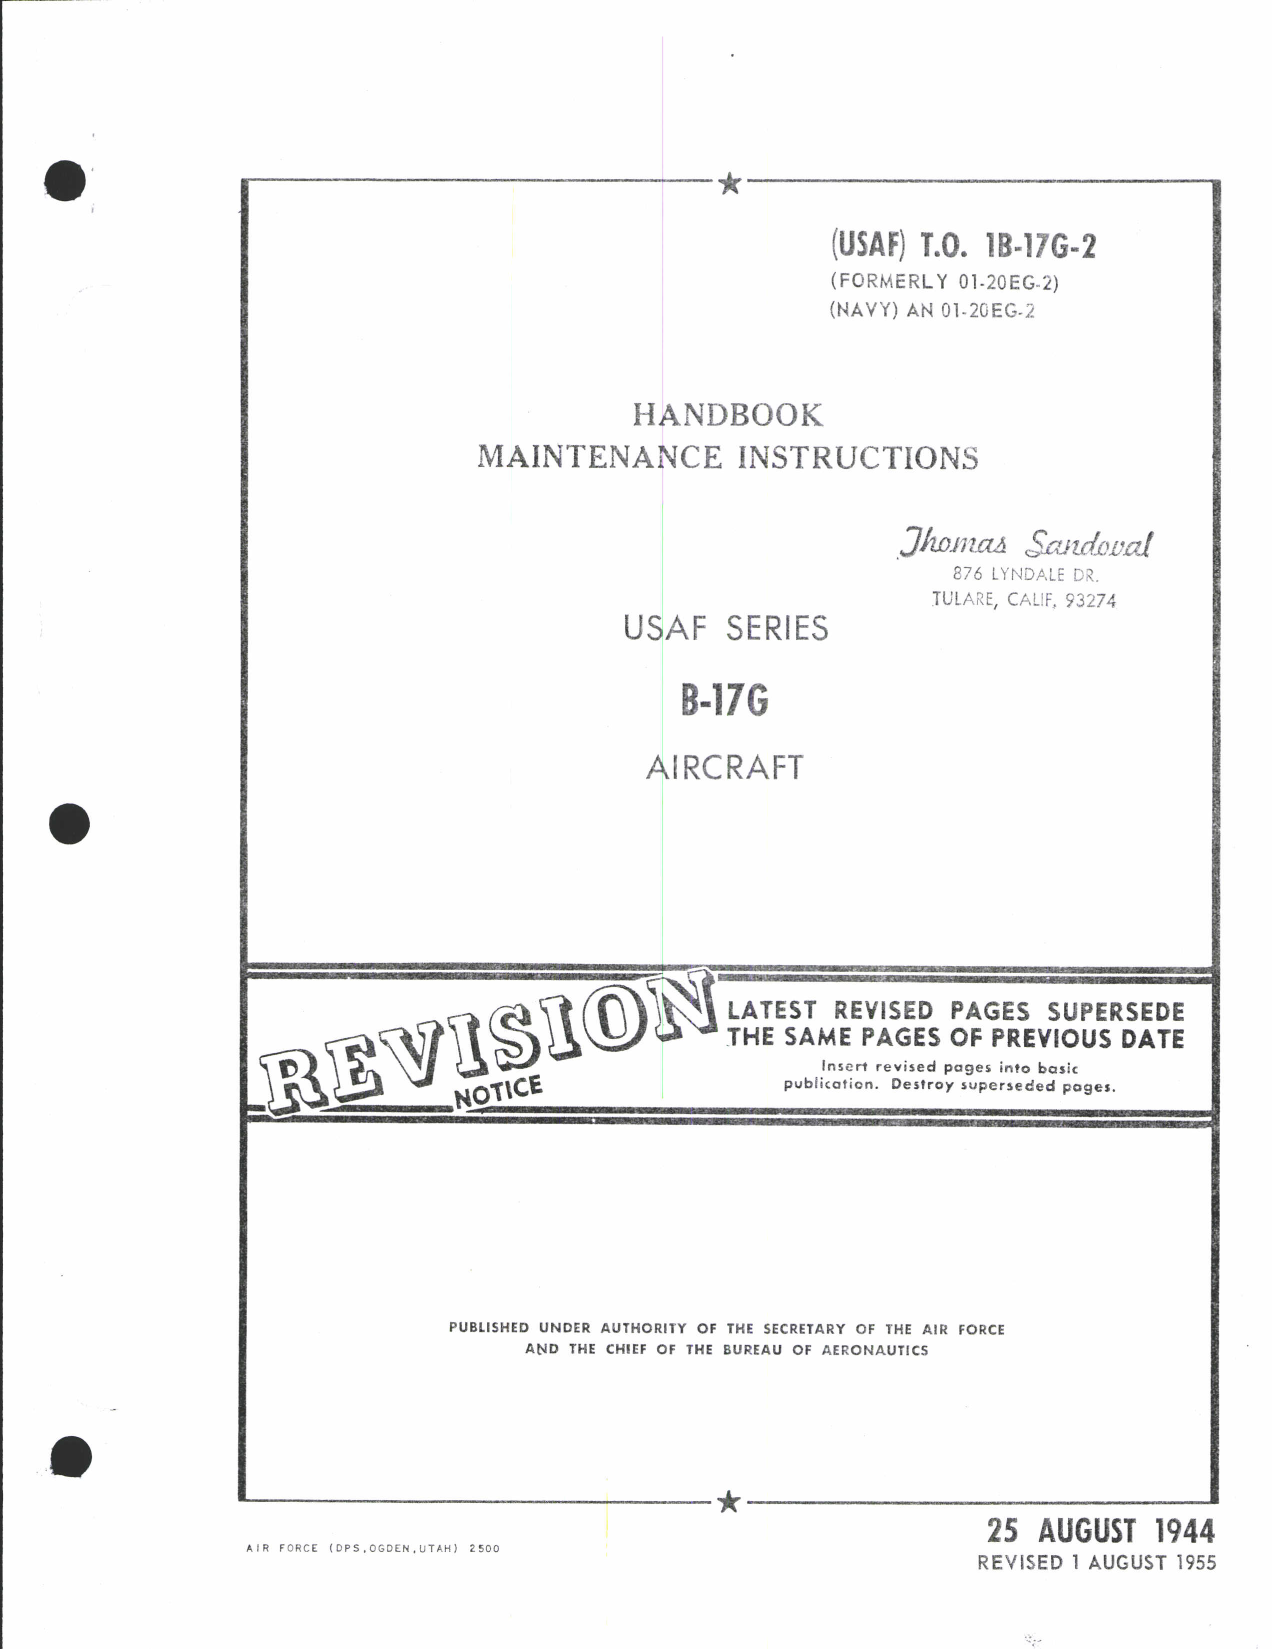 Sample page 1 from AirCorps Library document: Maintenance Instructions for B-17G Aircraft